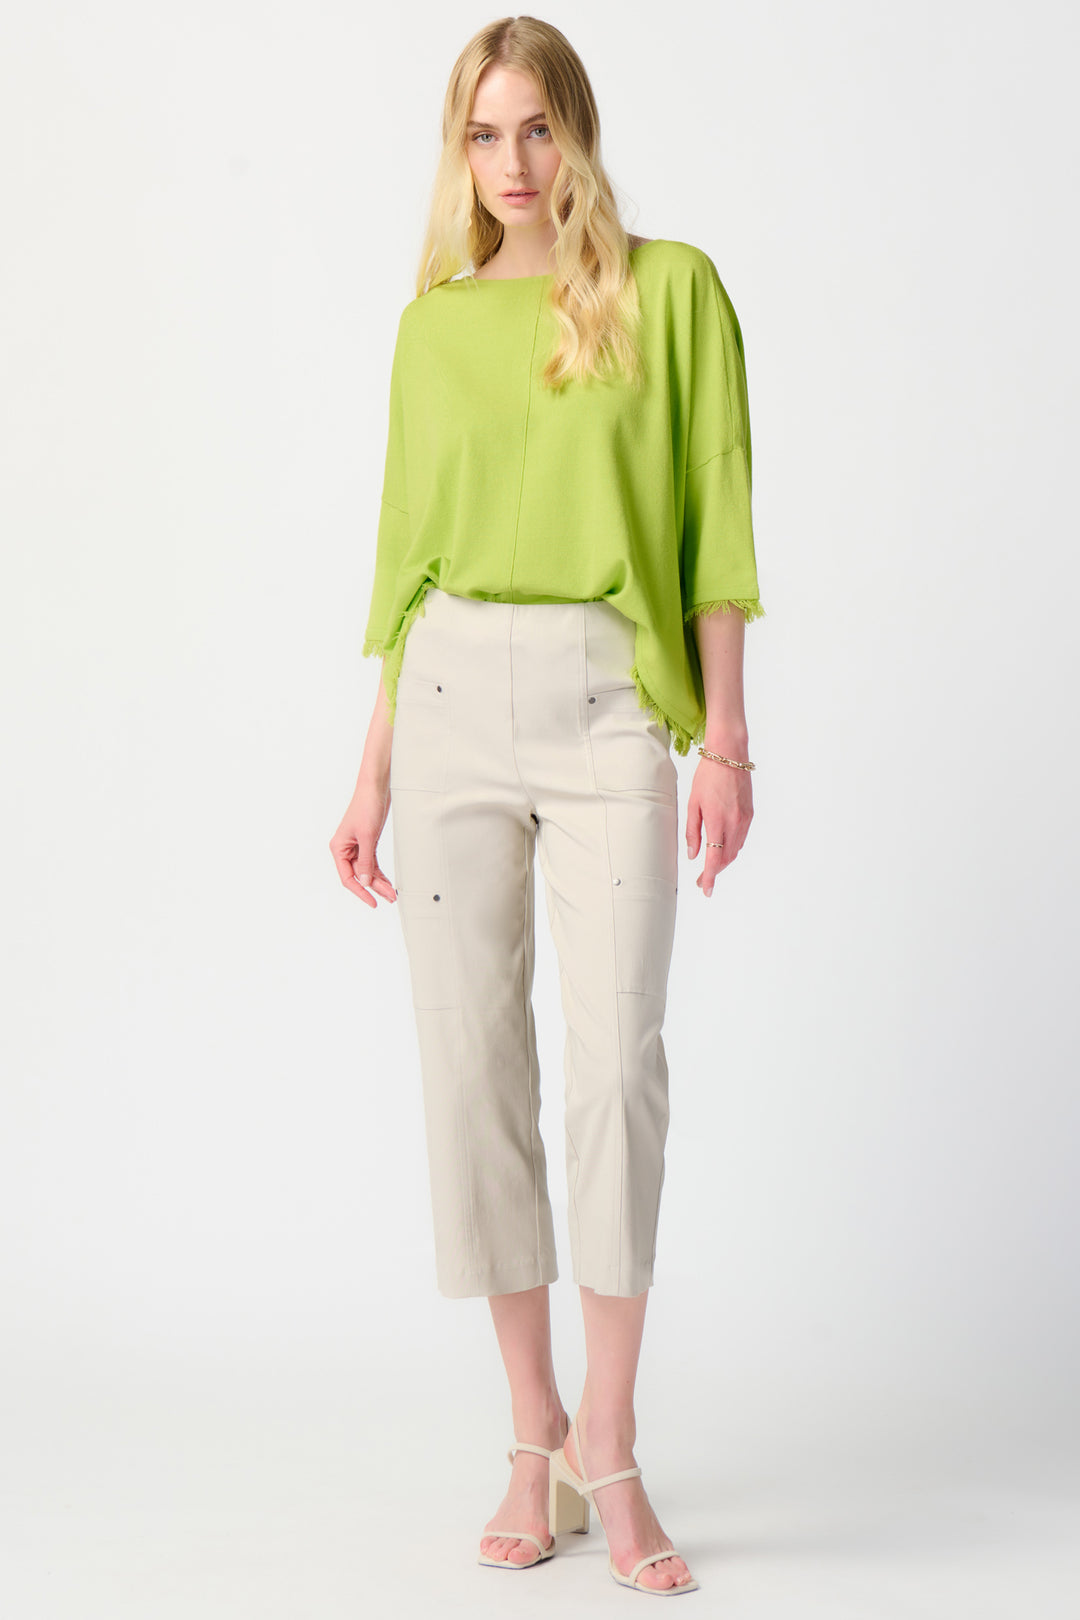 Joseph Ribkoff Summer 2024  With a high waist fit and cargo style, this pant can easily be dressed up or down for any occasion. 